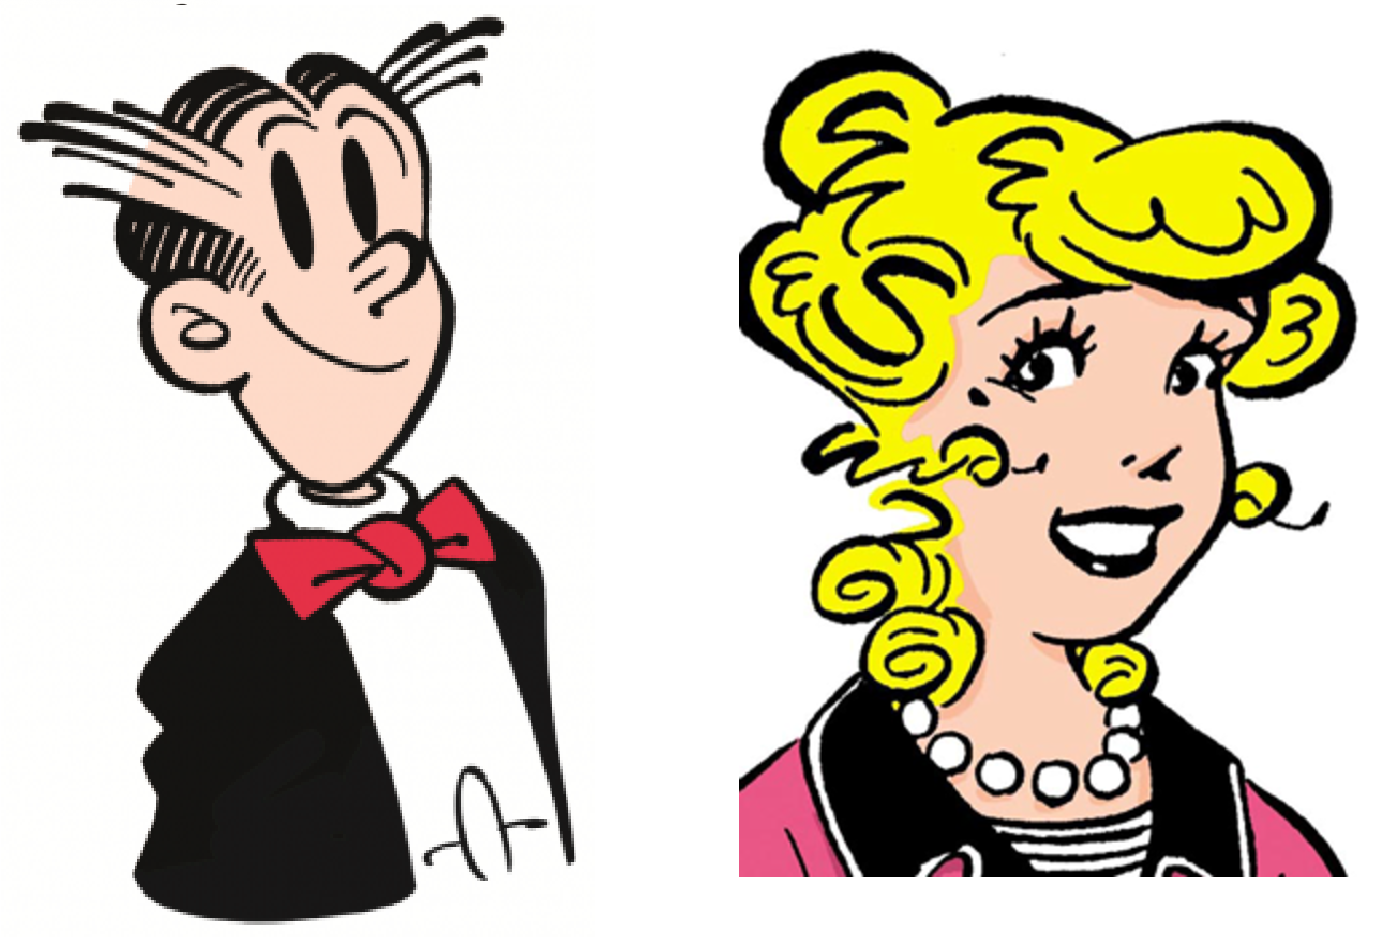 blondie and dagwood bumstead